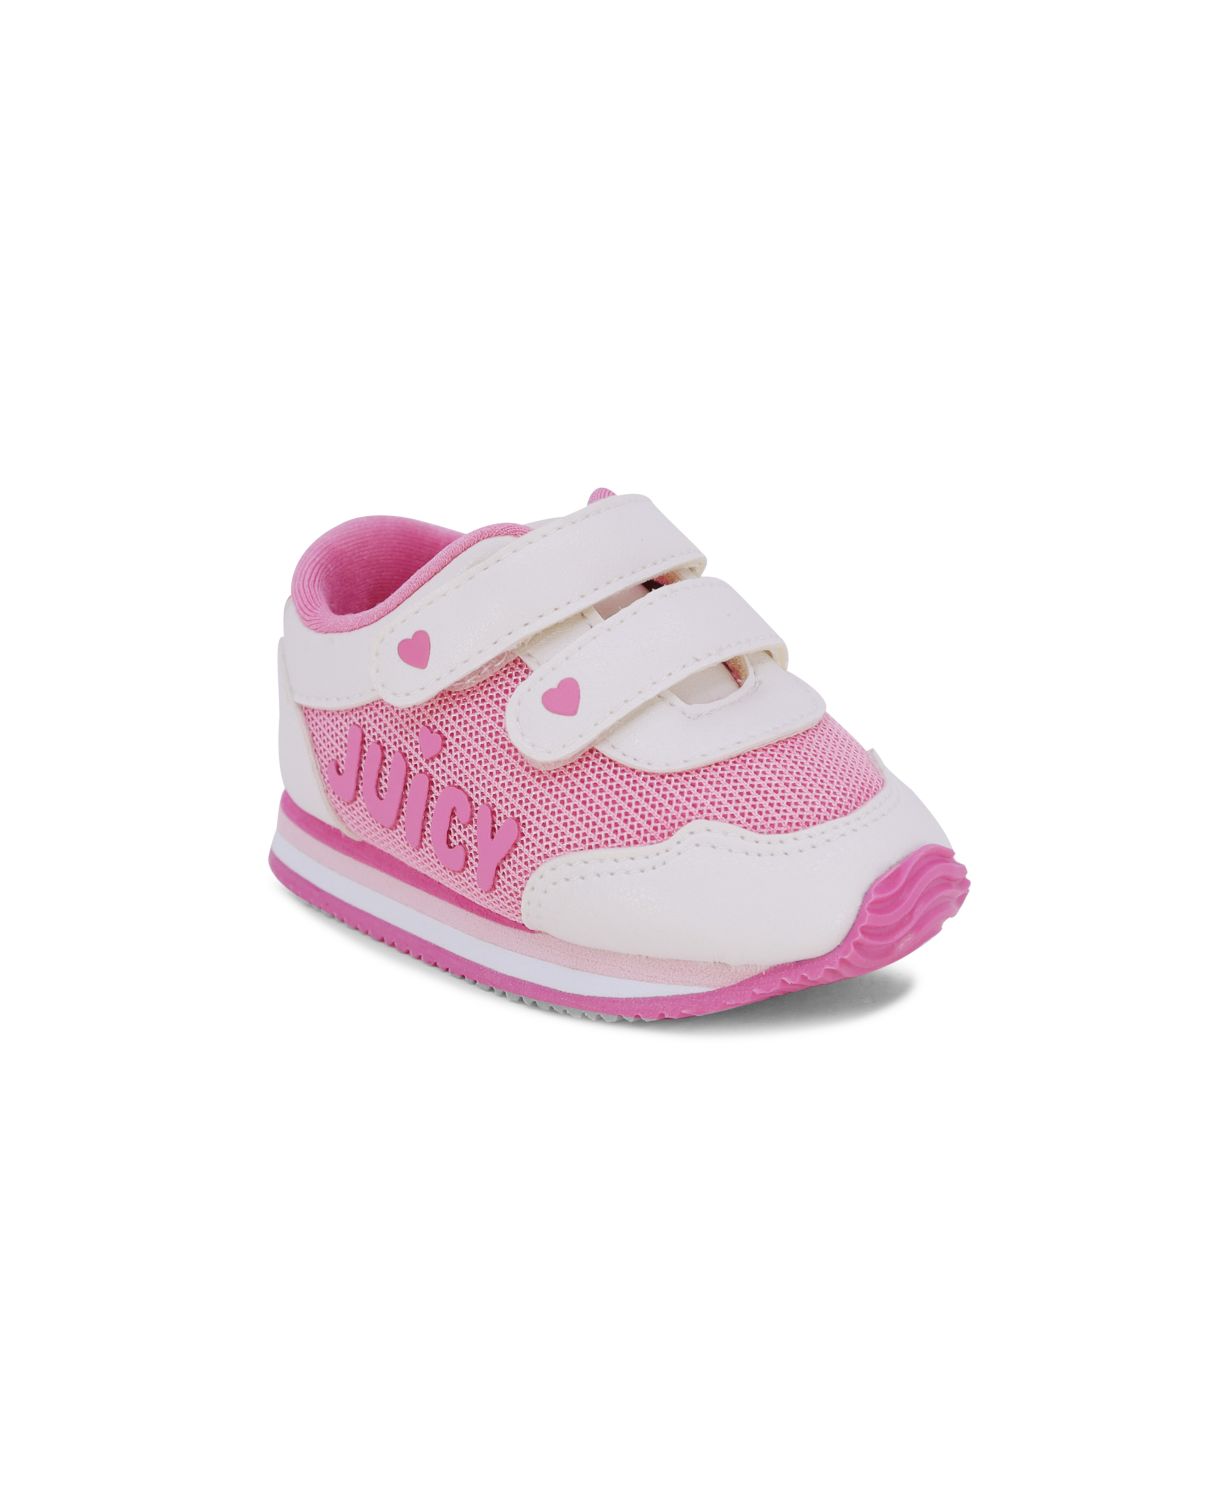 Кроссовки Baby Girl's Heart Juicy Couture